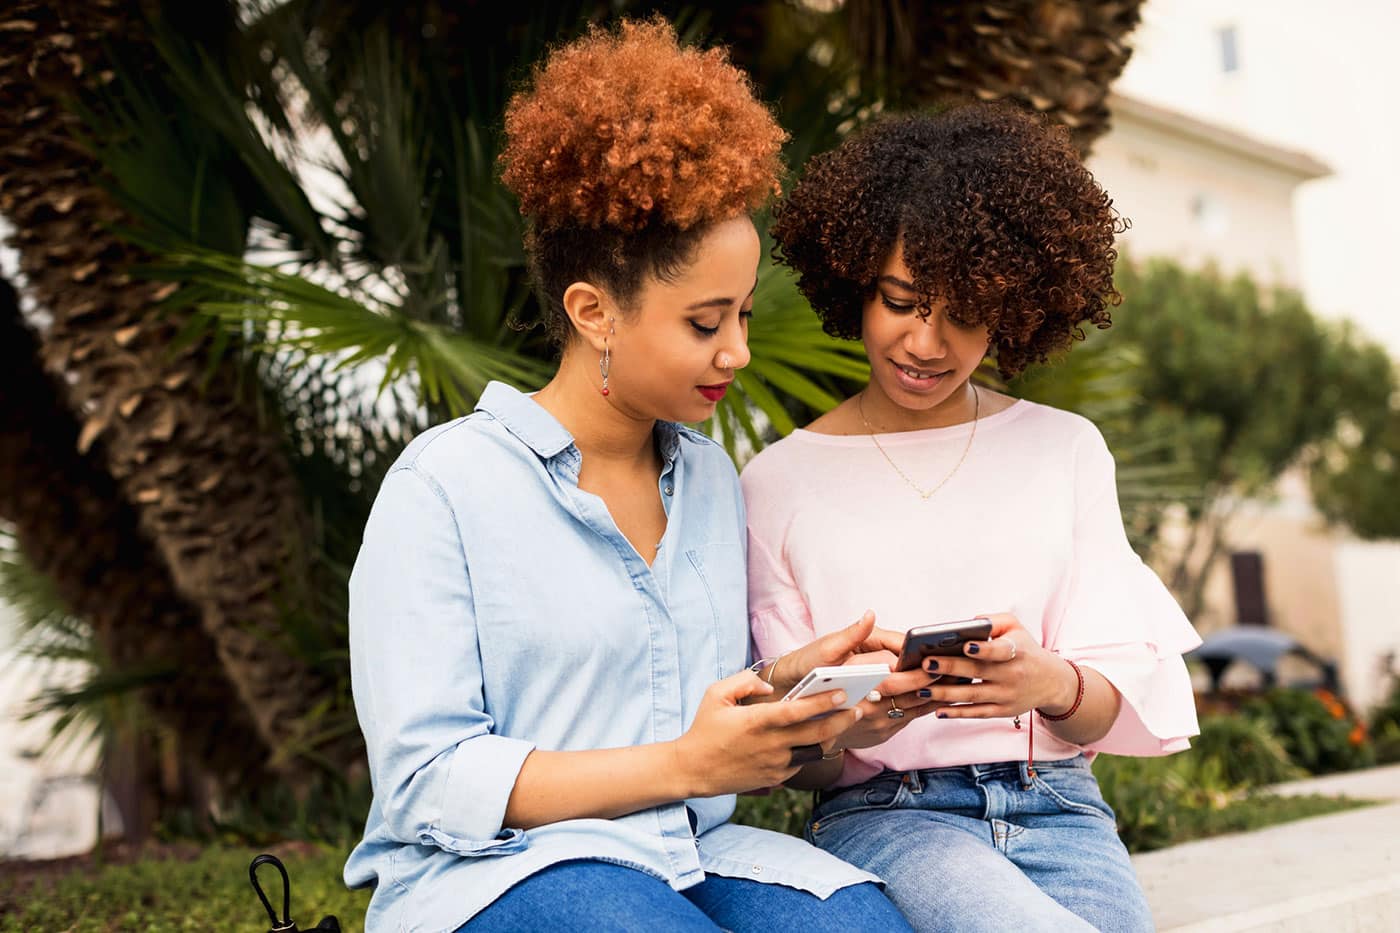 Two female friends use social media on their smartphones and relax outdoors by sitting on a bench in the city. Leisure time outdoors.